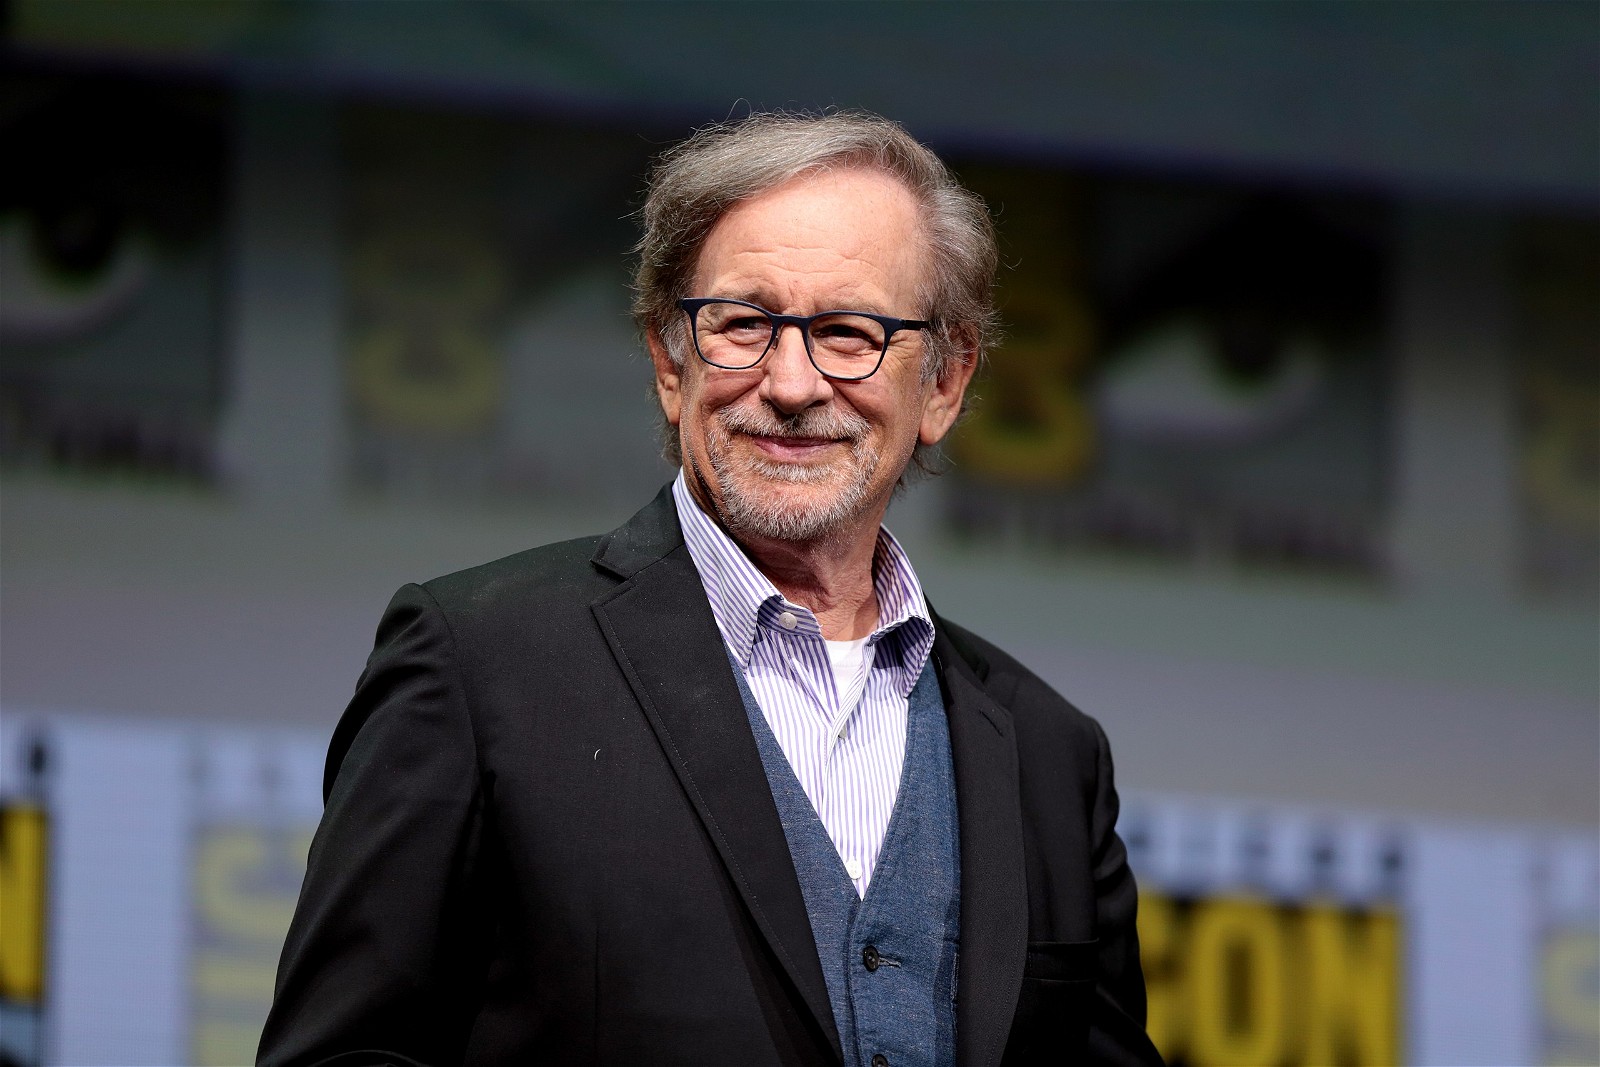 Steven Spielberg smiling at the 2017 San Diego Comic Con International